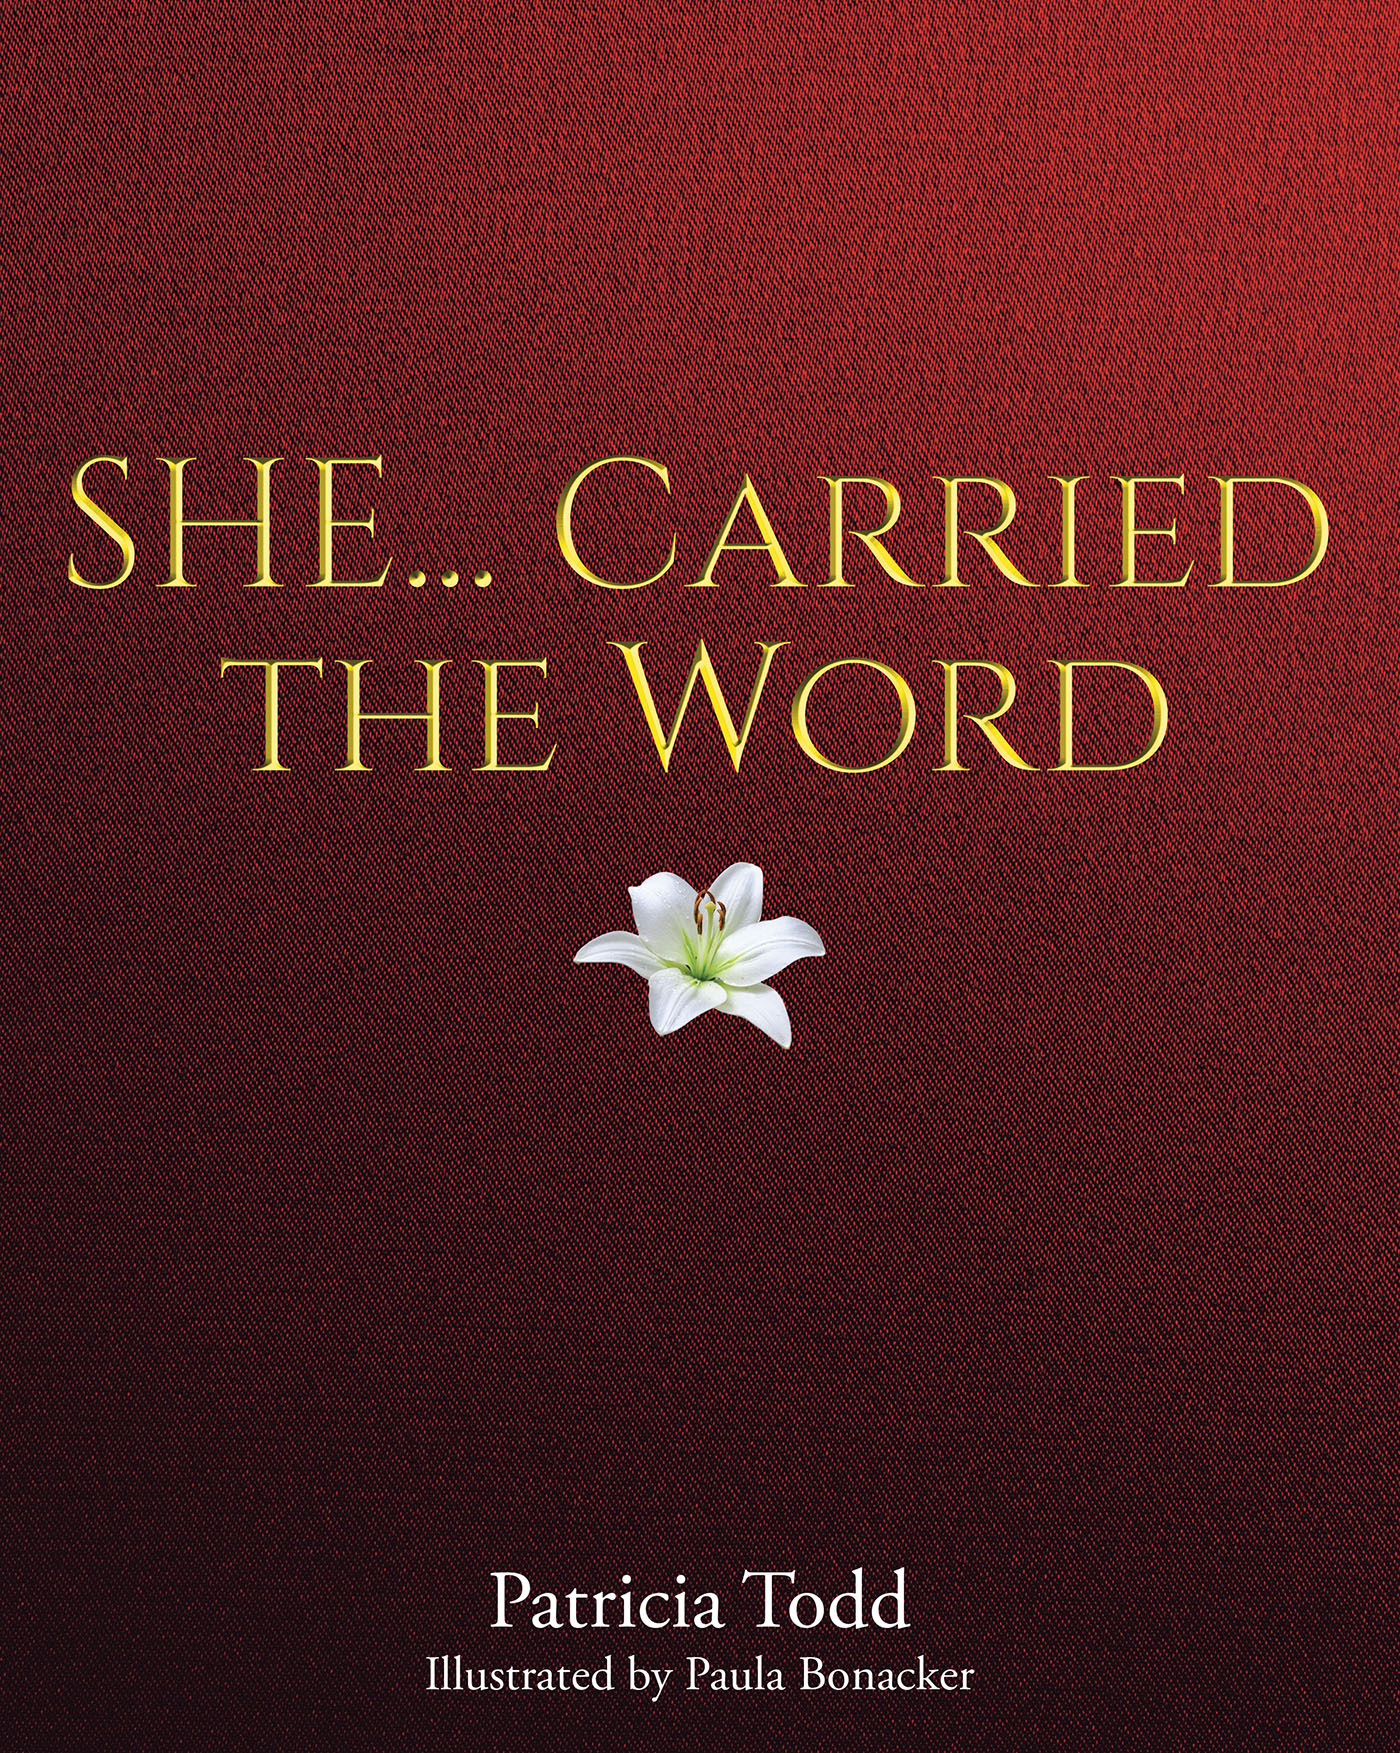 Patricia Todd’s Newly Released “SHE...Carried the Word” is a Celebration of the Mother of God